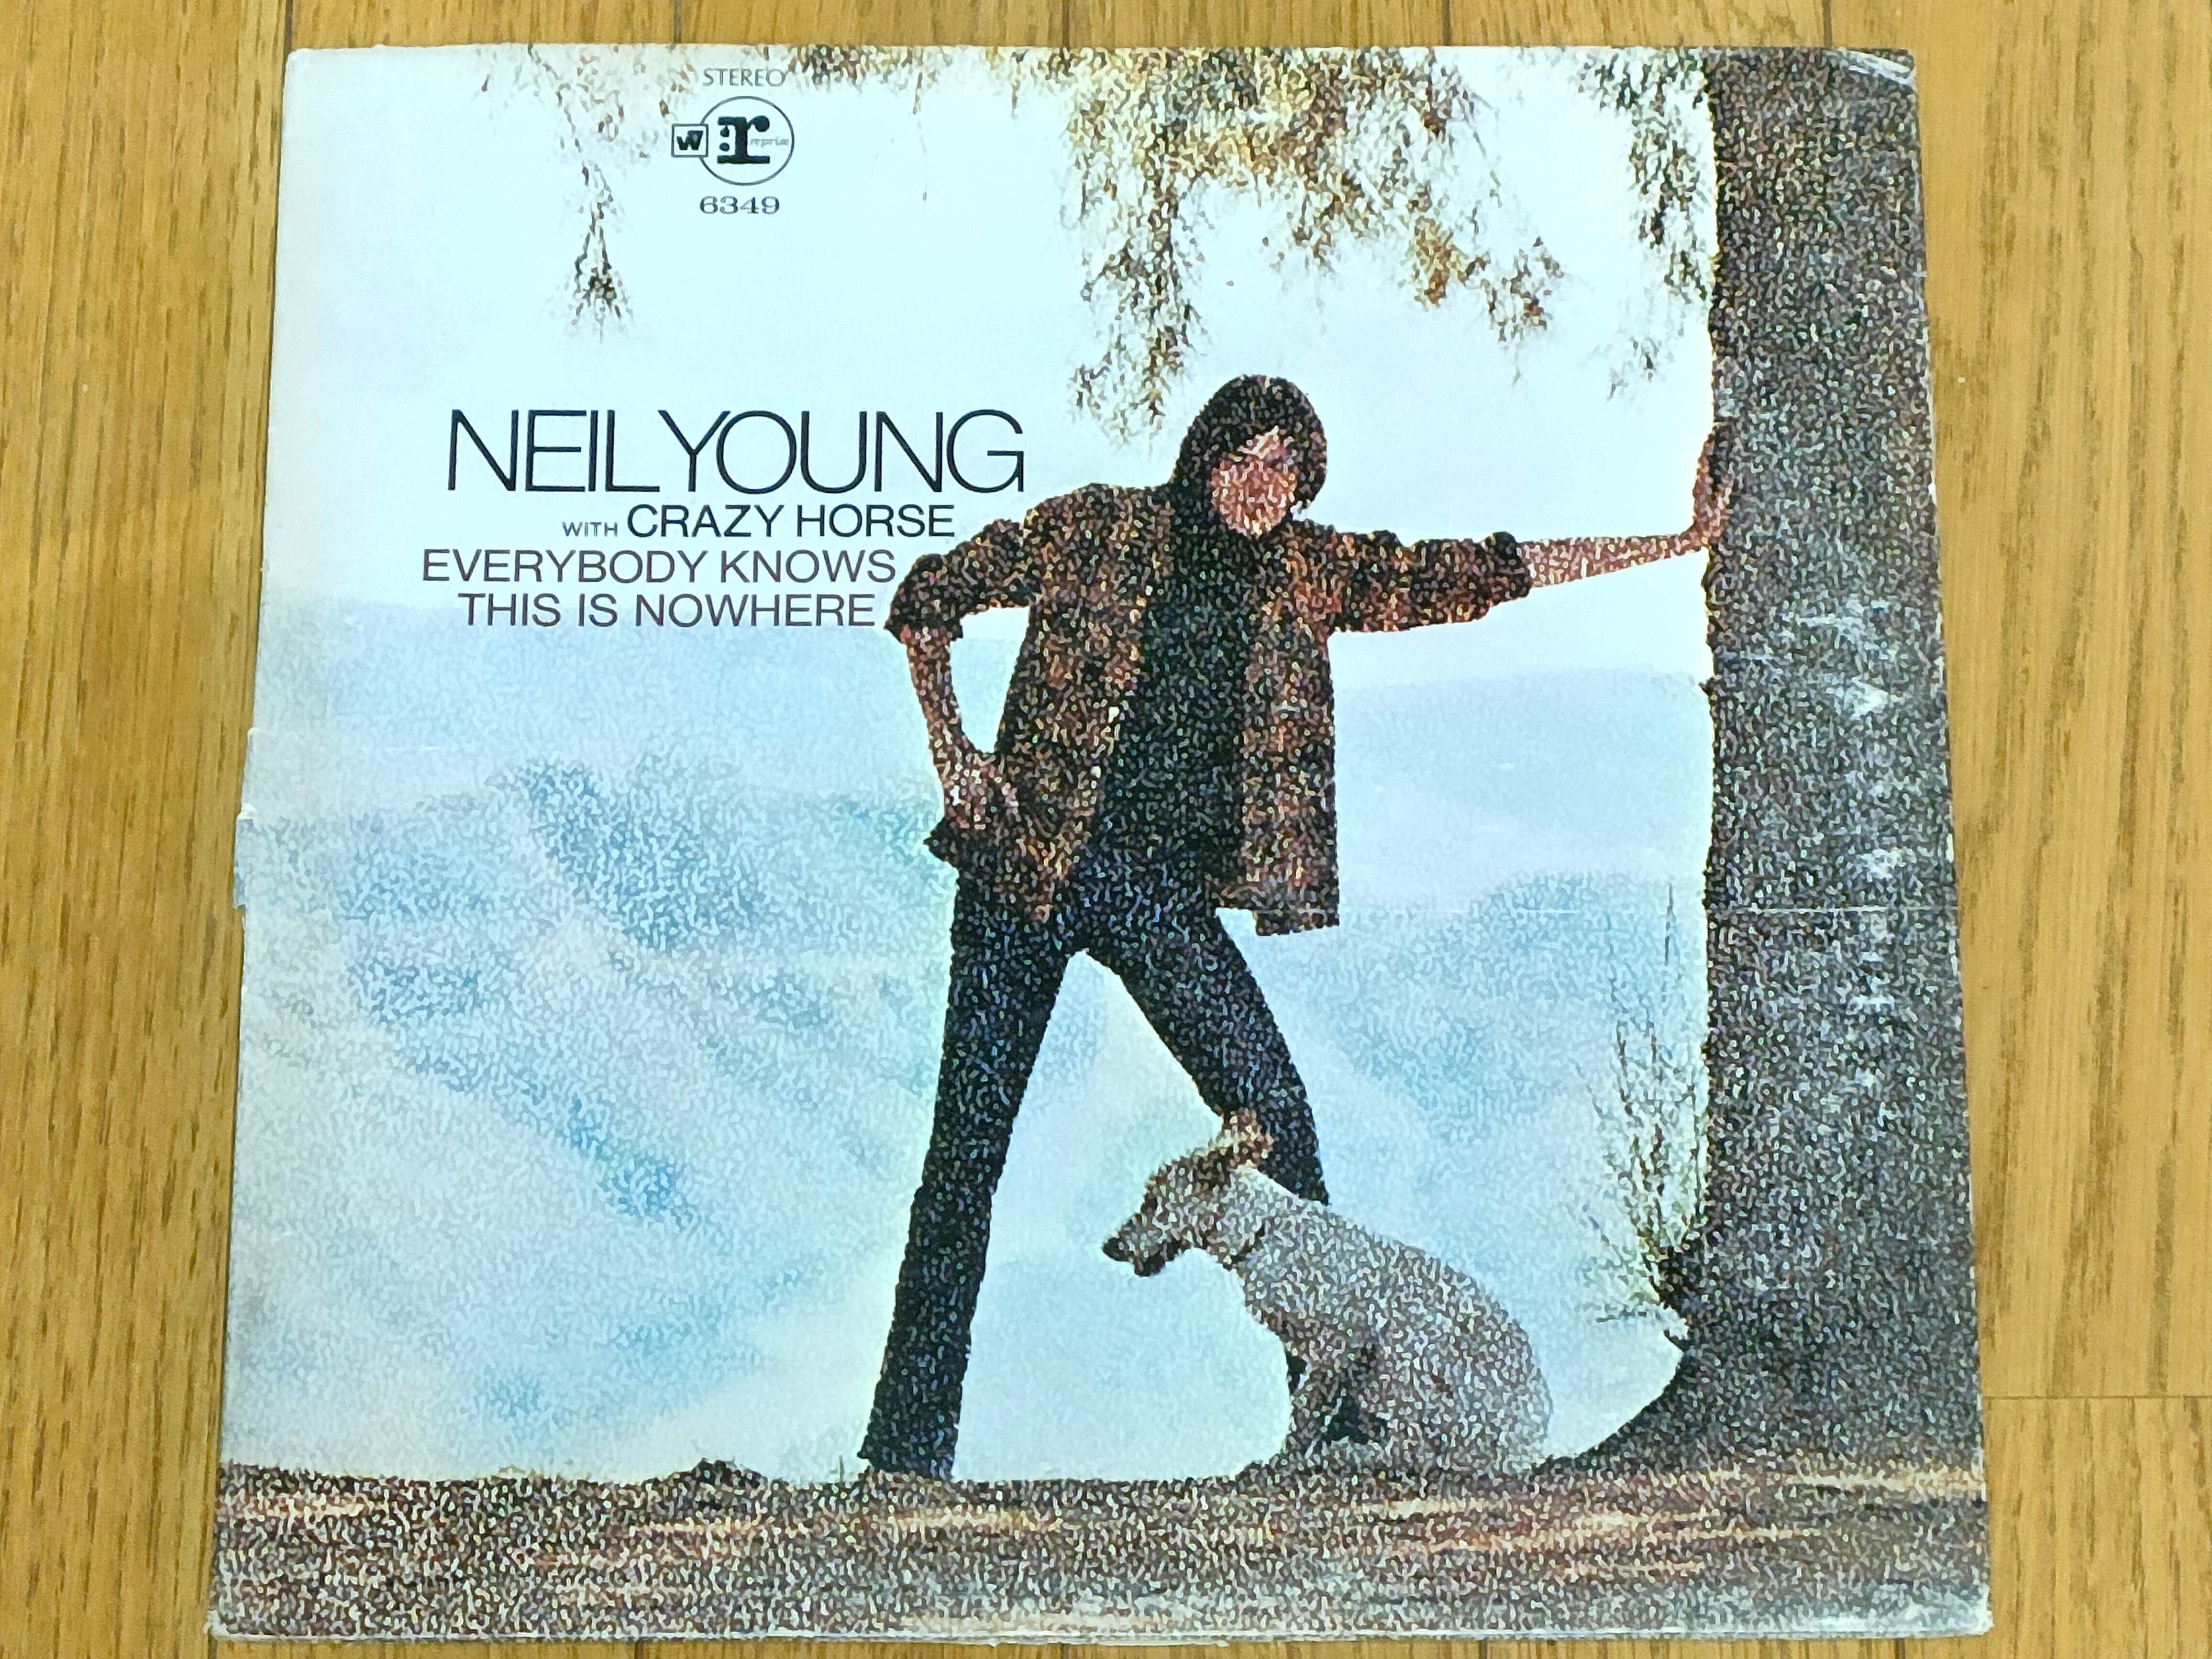 Everybody Knows This Is Nowhere】(1969) Neil Young with Crazy